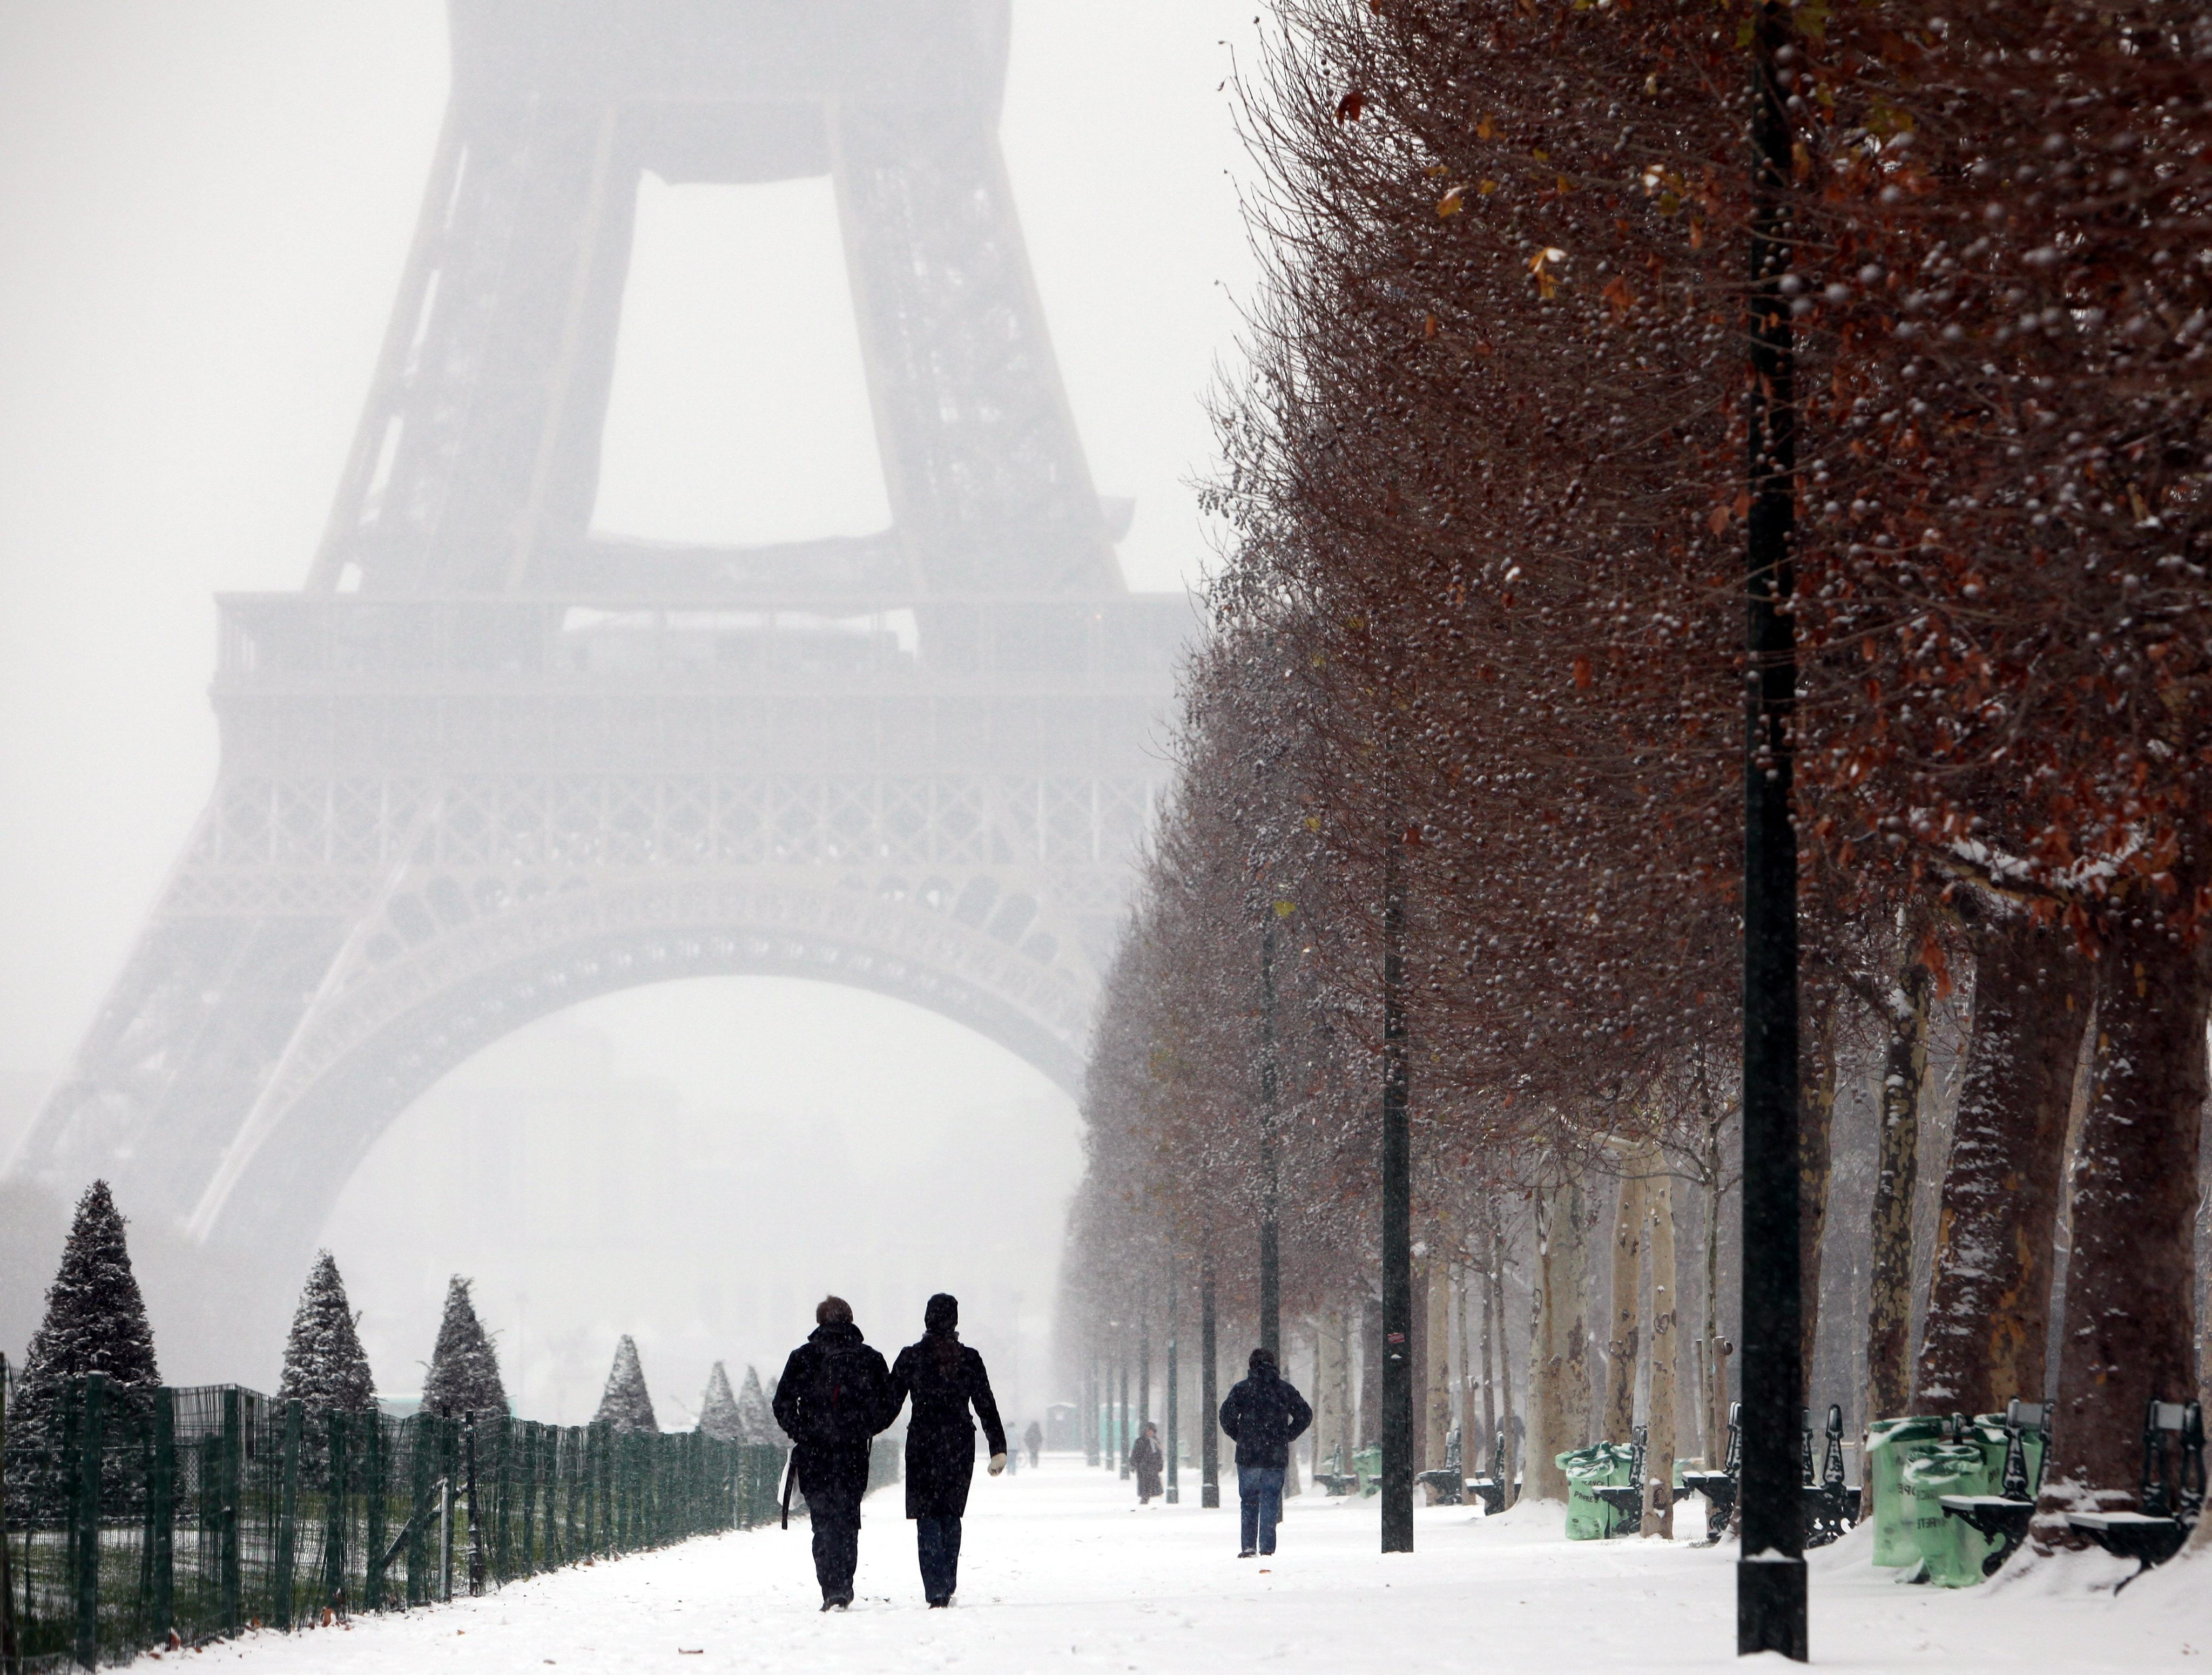 man and woman walking on snow coated road near the Eiffel Tower